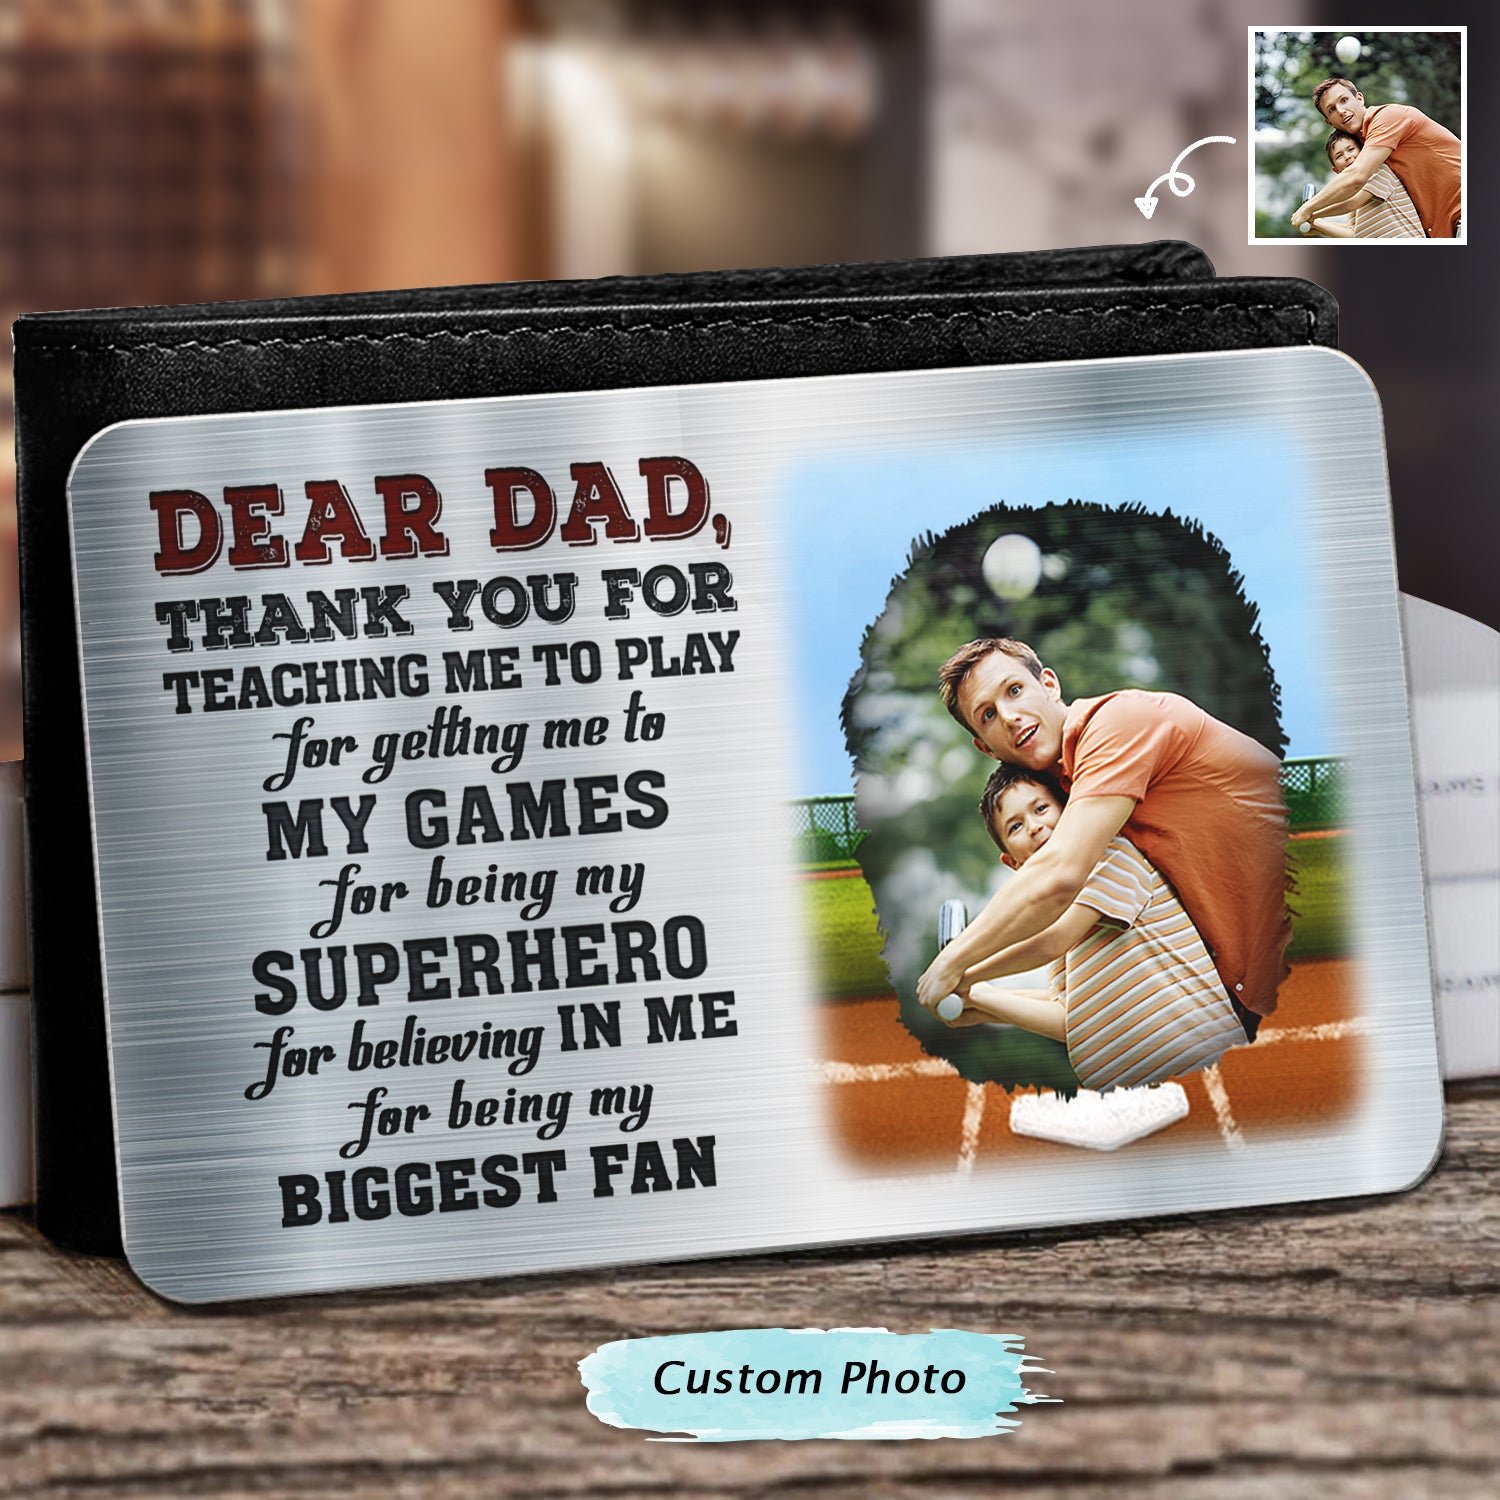 Custom Photo Dear Dad Thank You For Teaching Me - Birthday, Loving Gift For Baseball, Softball Father - Personalized Aluminum Wallet Card